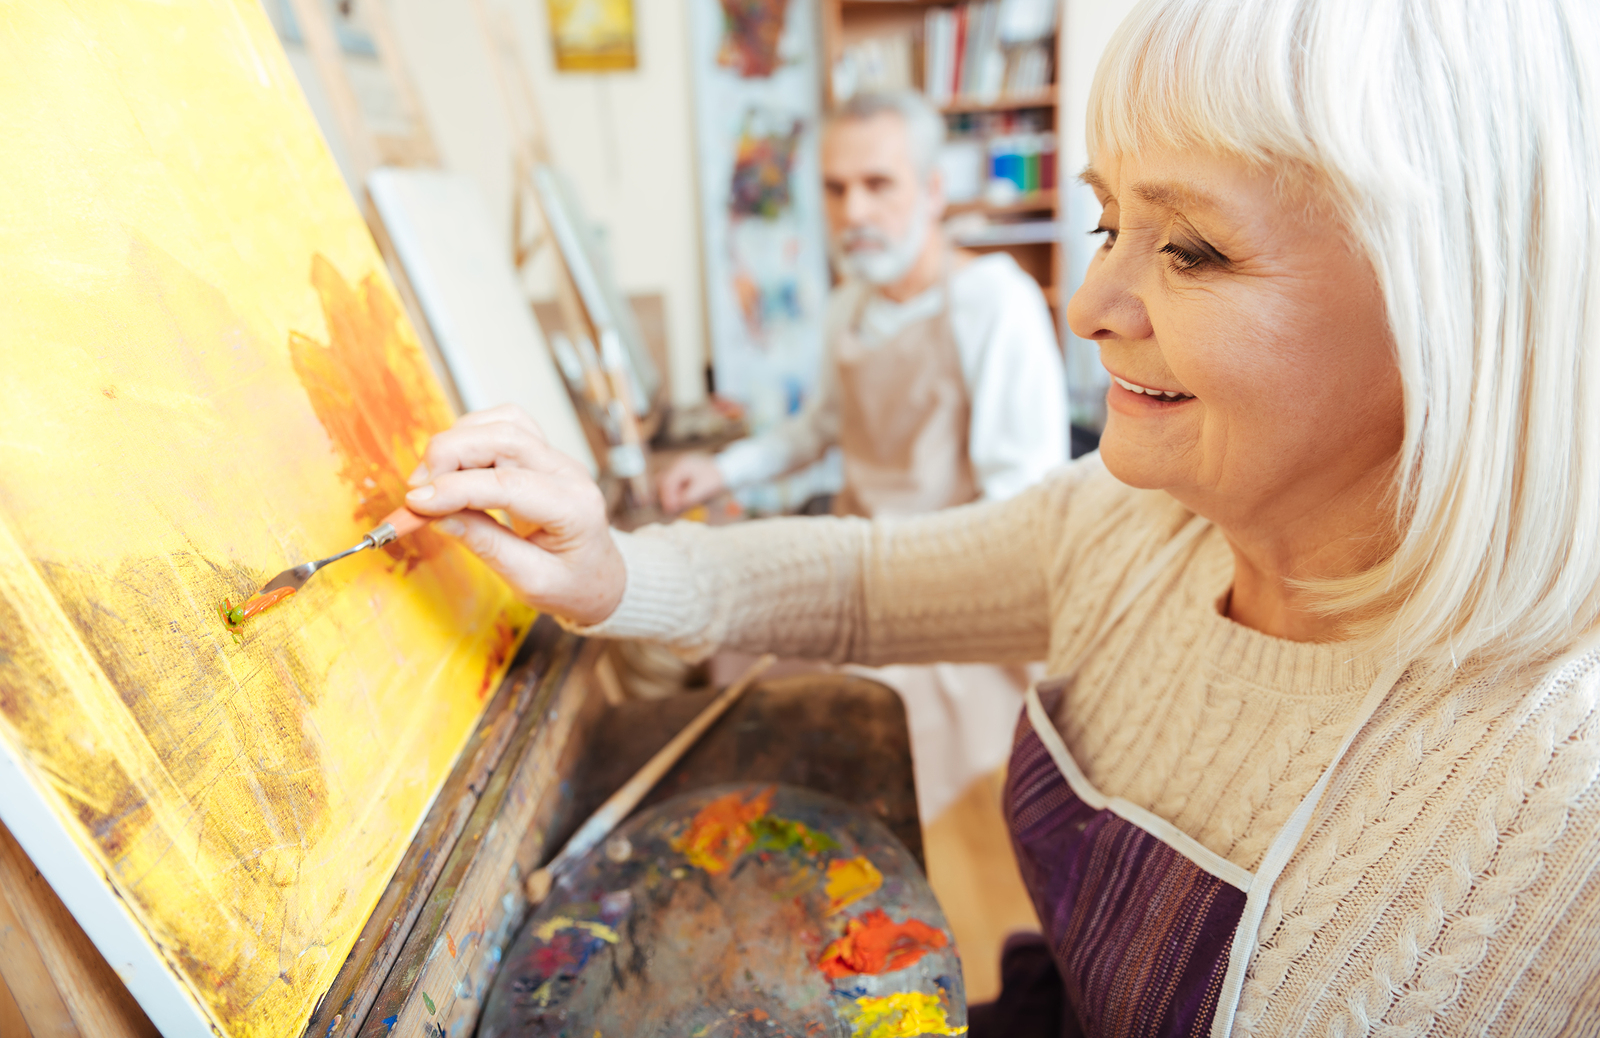 FEBC: The Benefits of Painting for Everyone, Including Alzheimer's